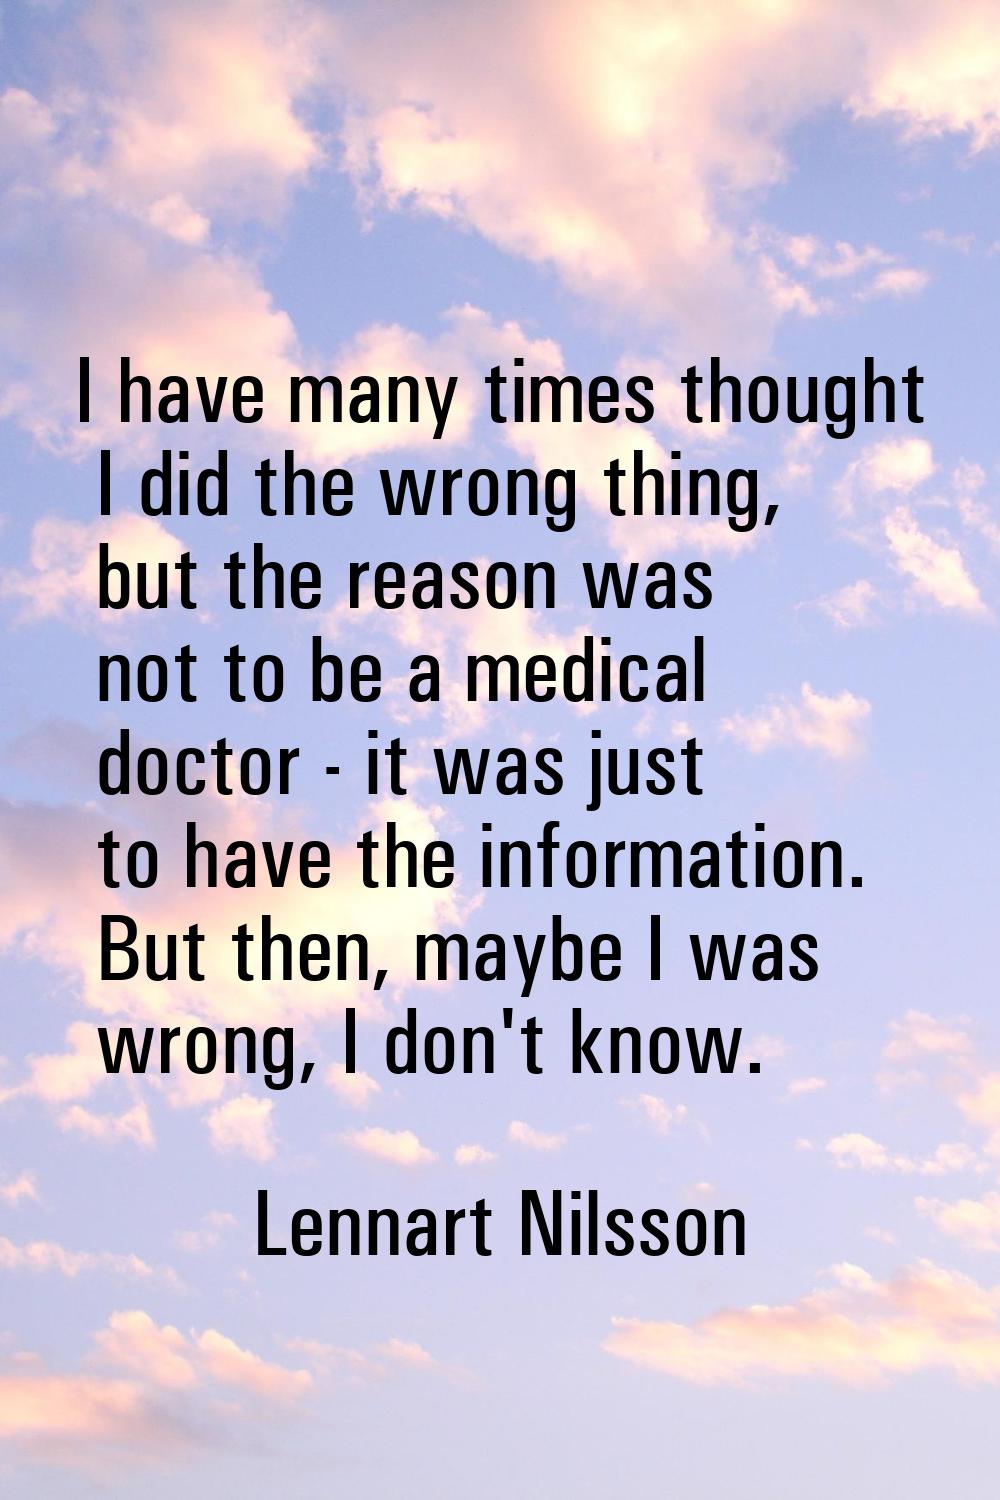 I have many times thought I did the wrong thing, but the reason was not to be a medical doctor - it